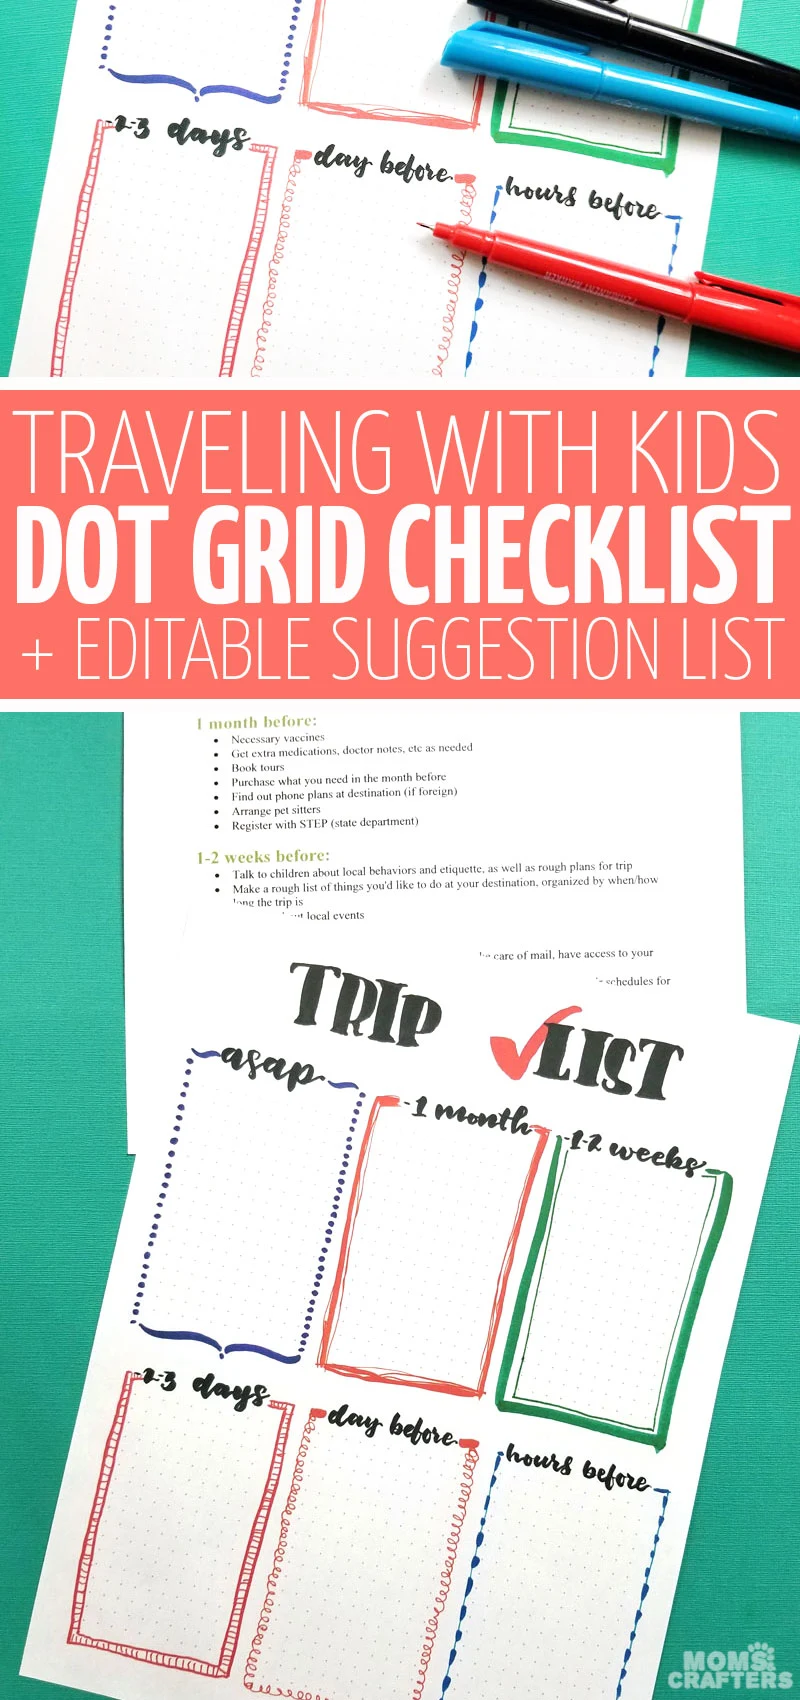 Looking for a cool travel with kids checklist? This free printable pre-trip to do list will help you make sure you have everything done and organized for your long haul international plane trip with young kids including toddlers, preschoolers, and more!